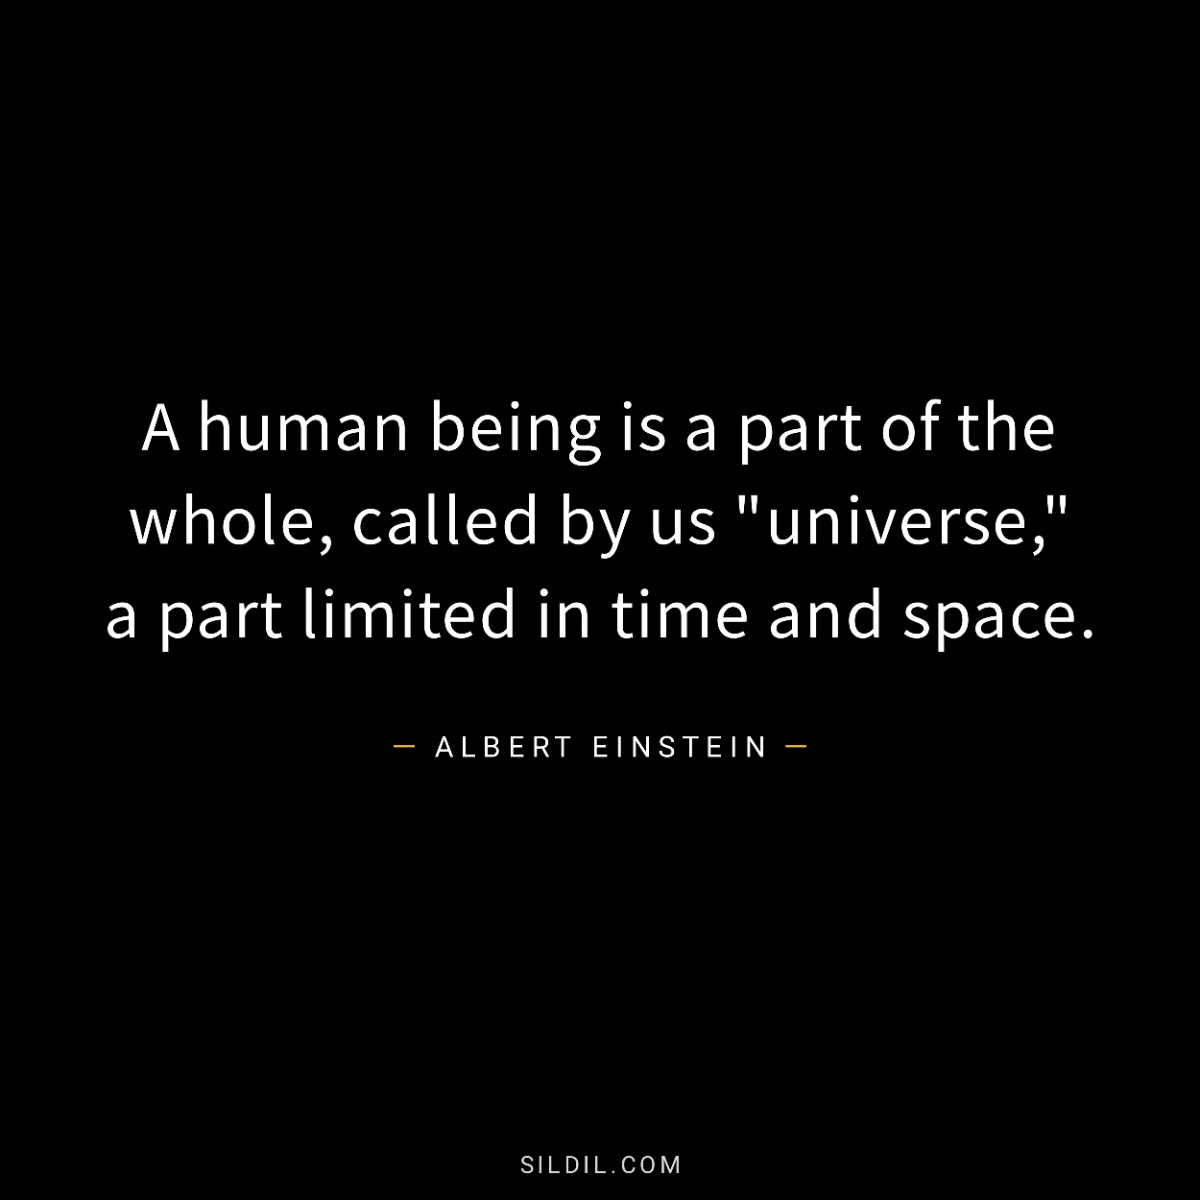 A human being is a part of the whole, called by us "universe," a part limited in time and space.